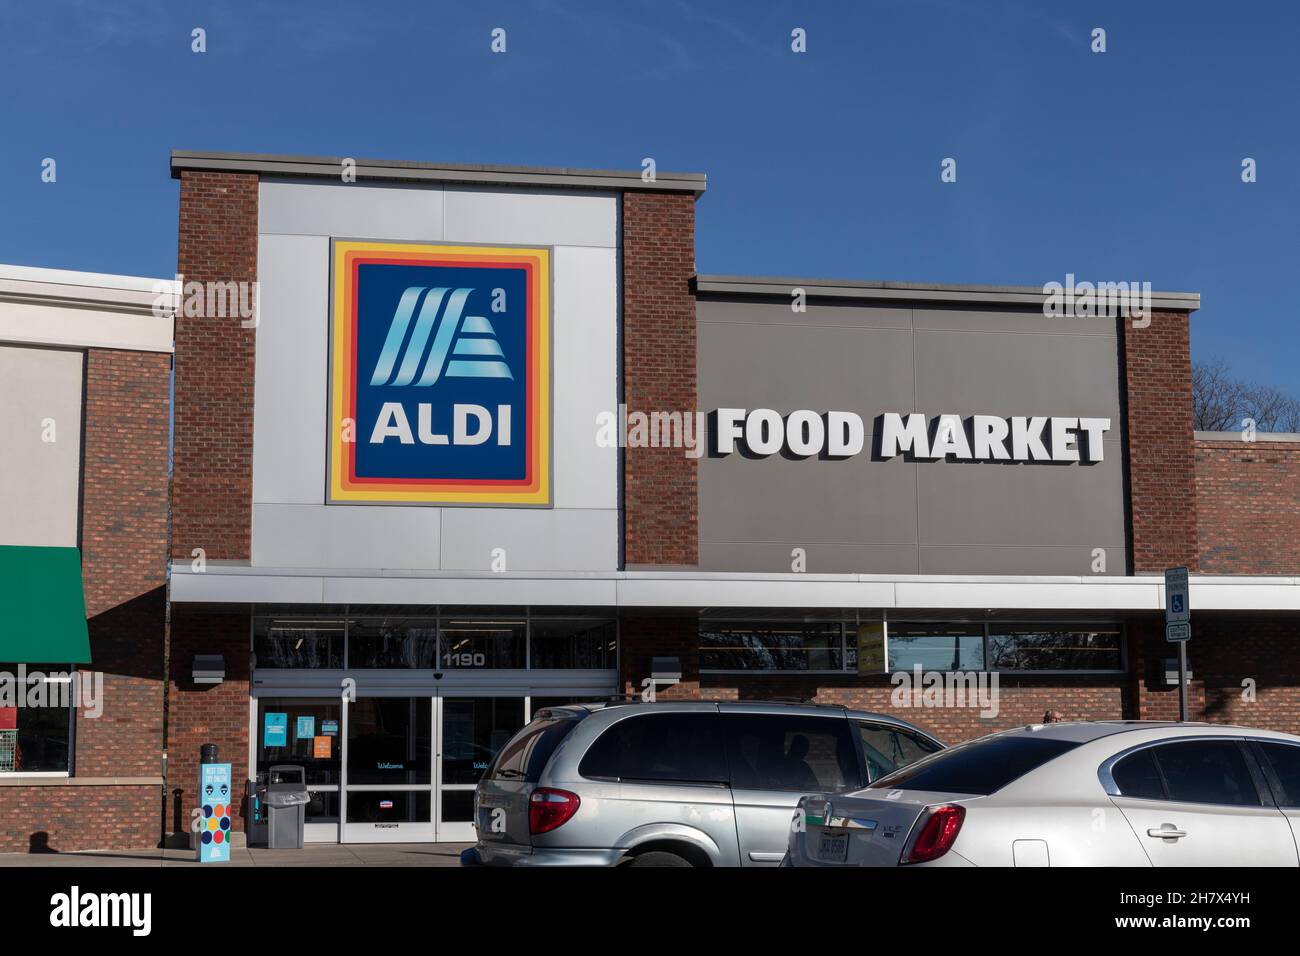 Englewood - Circa November 2021: Aldi Discount Supermarket. Aldi sells a range of grocery items, including produce, meat and dairy at discount prices. Stock Photo